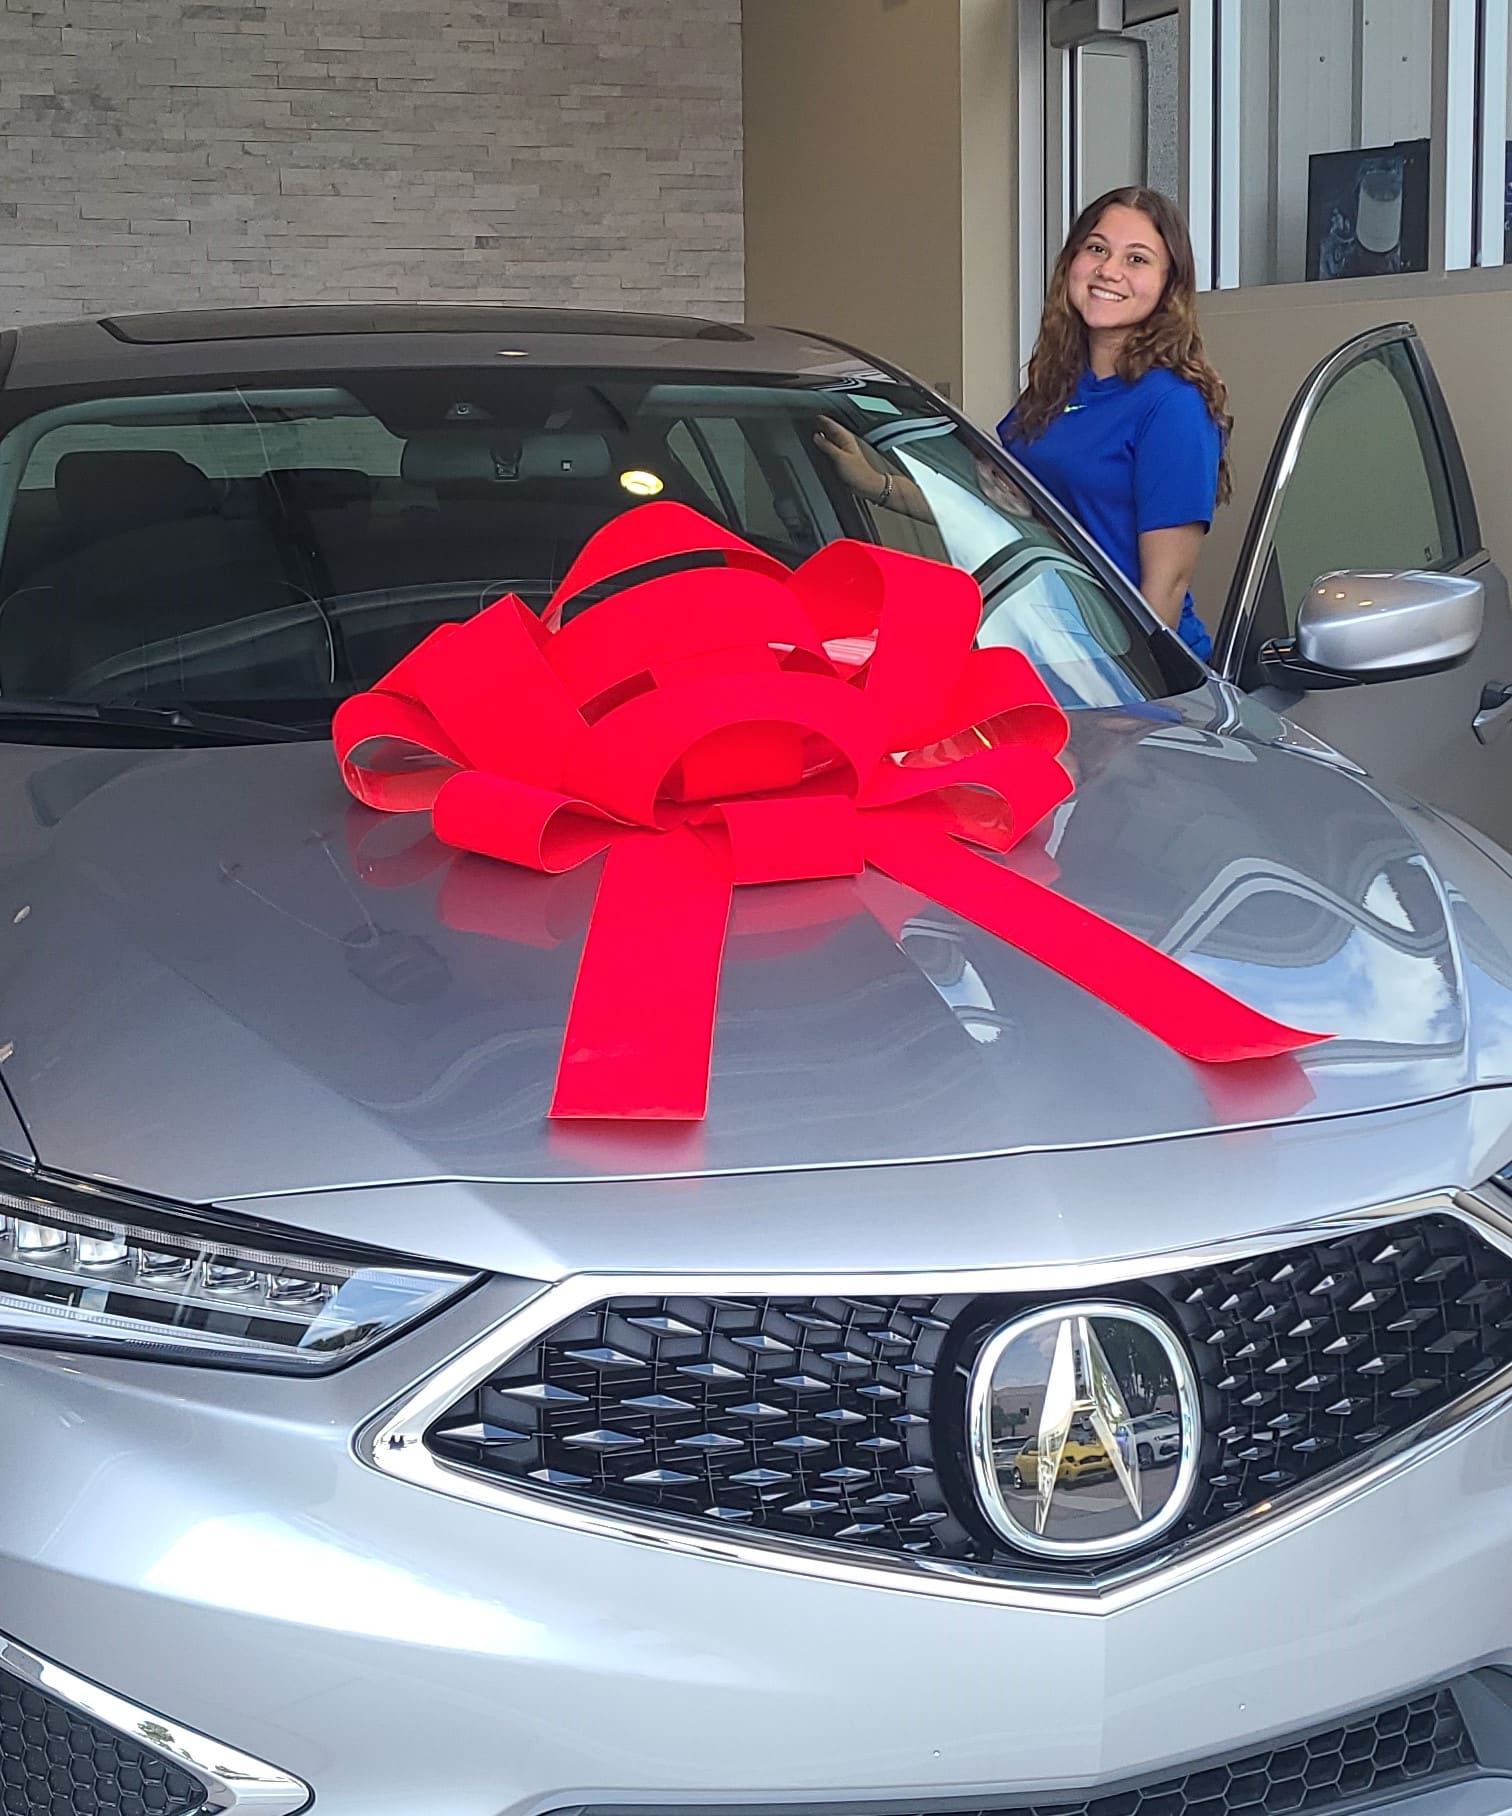 Stephanie bought her first new Acura.